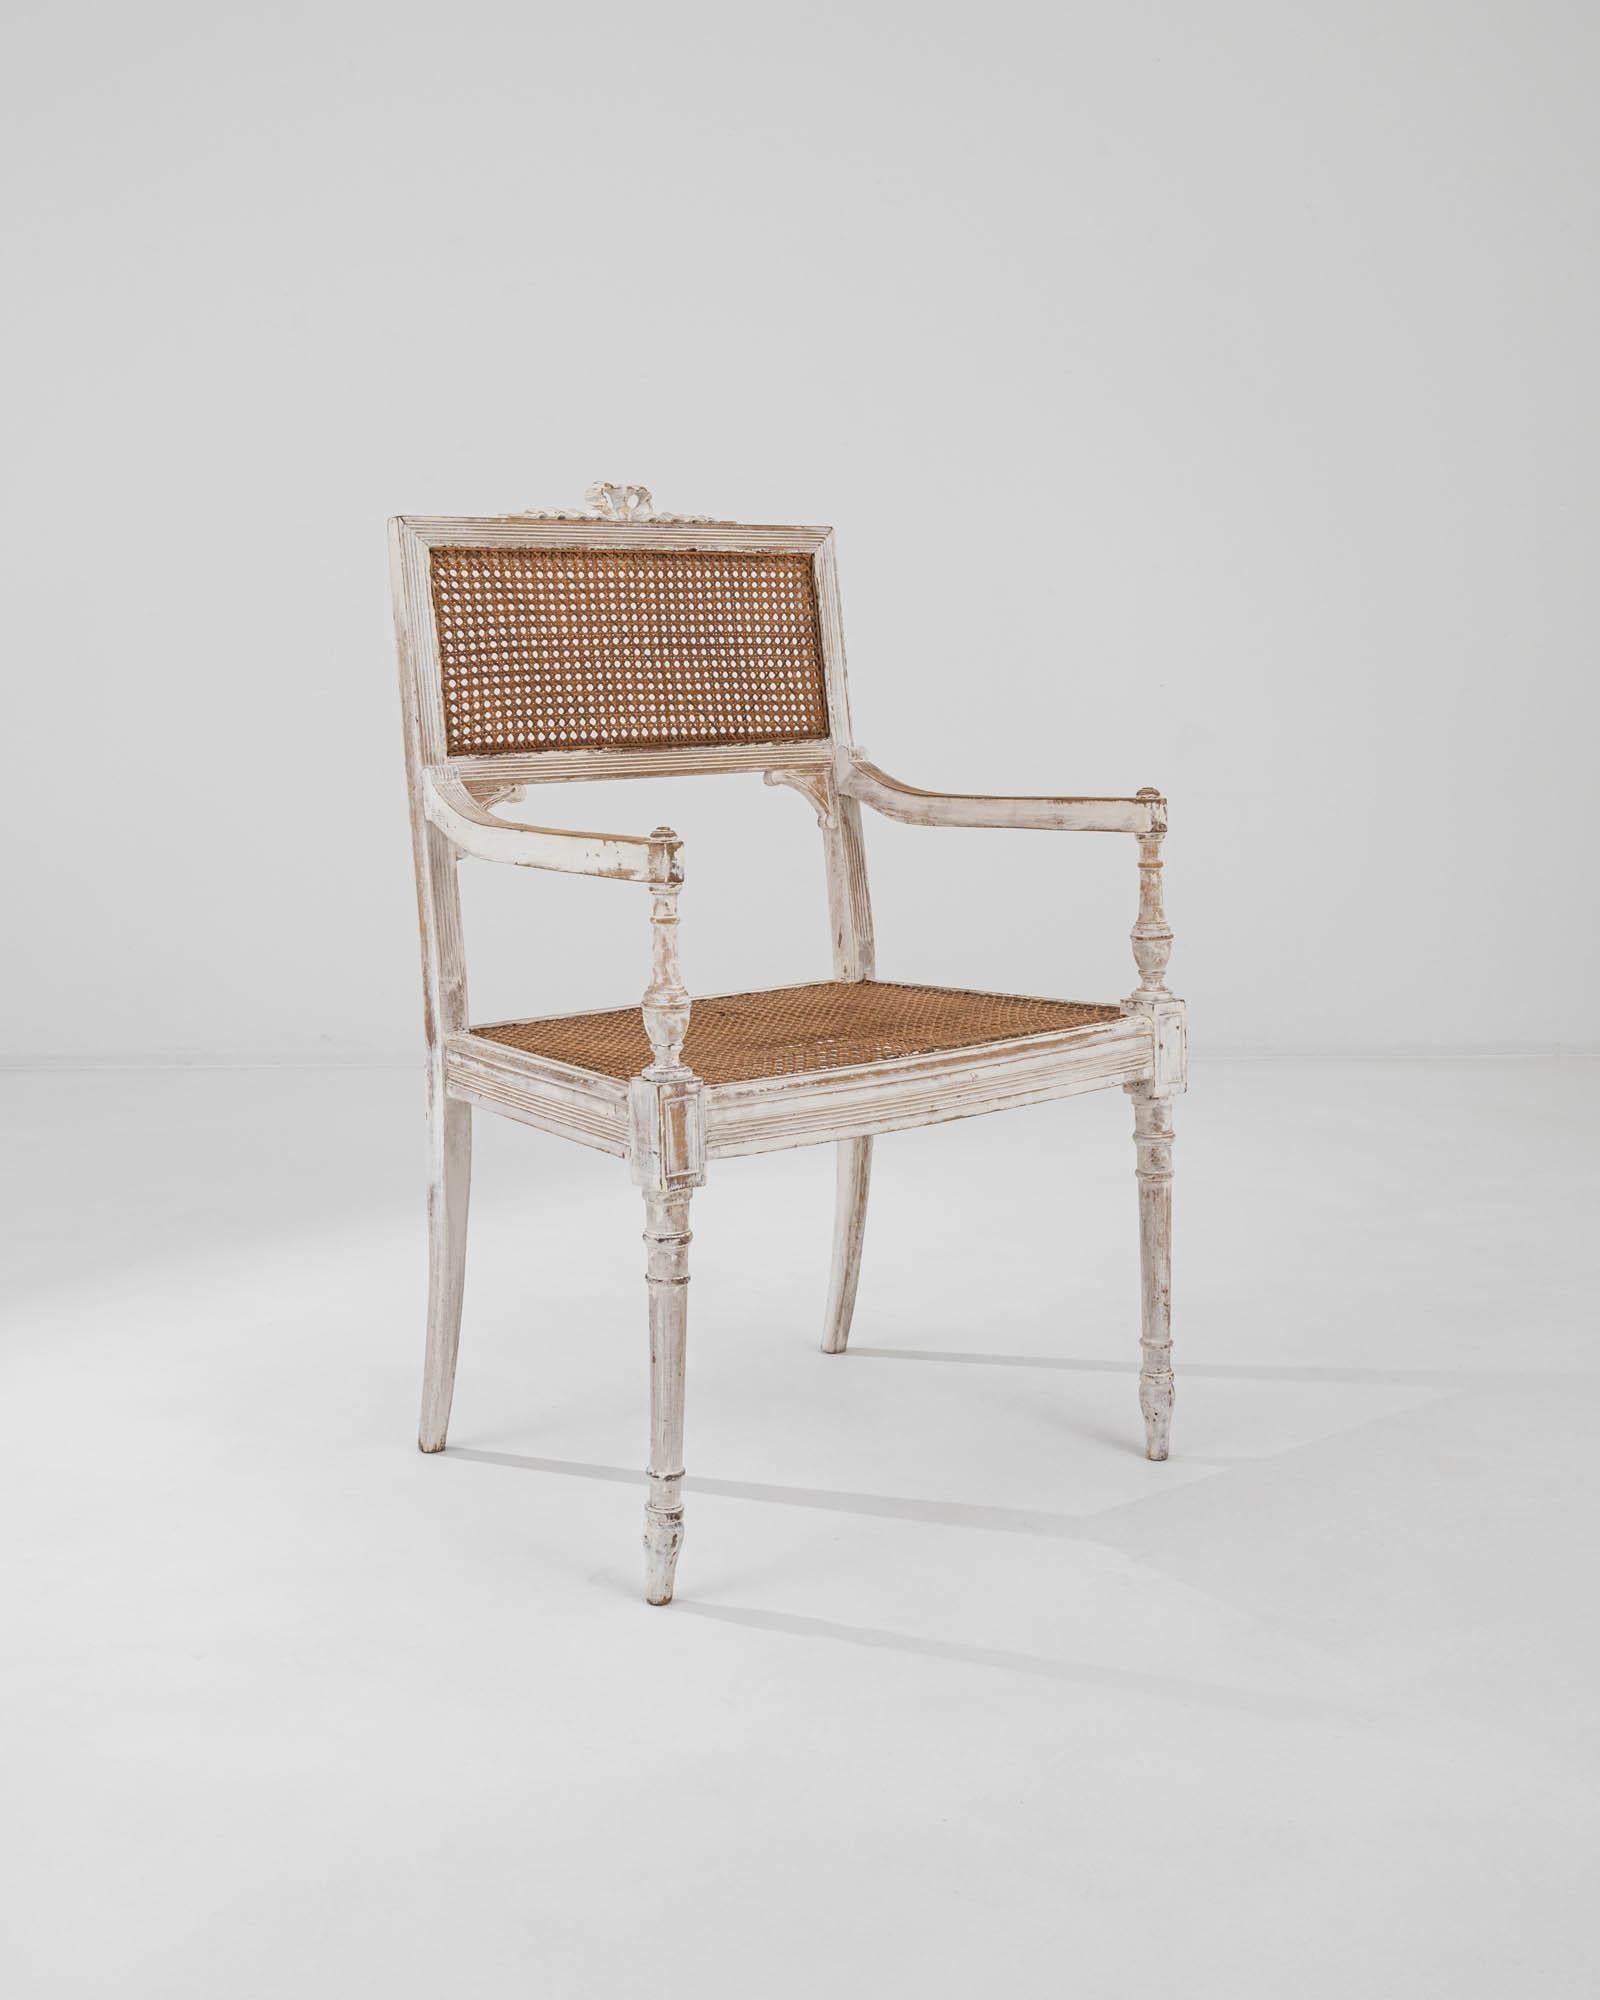 A wooden armchair created in early 20th century France. This timeless chair exudes a sense of distinguished and matured beauty. With finely curved and lathed legs and an octagonally woven wicker seat and back, this chair blends a classically